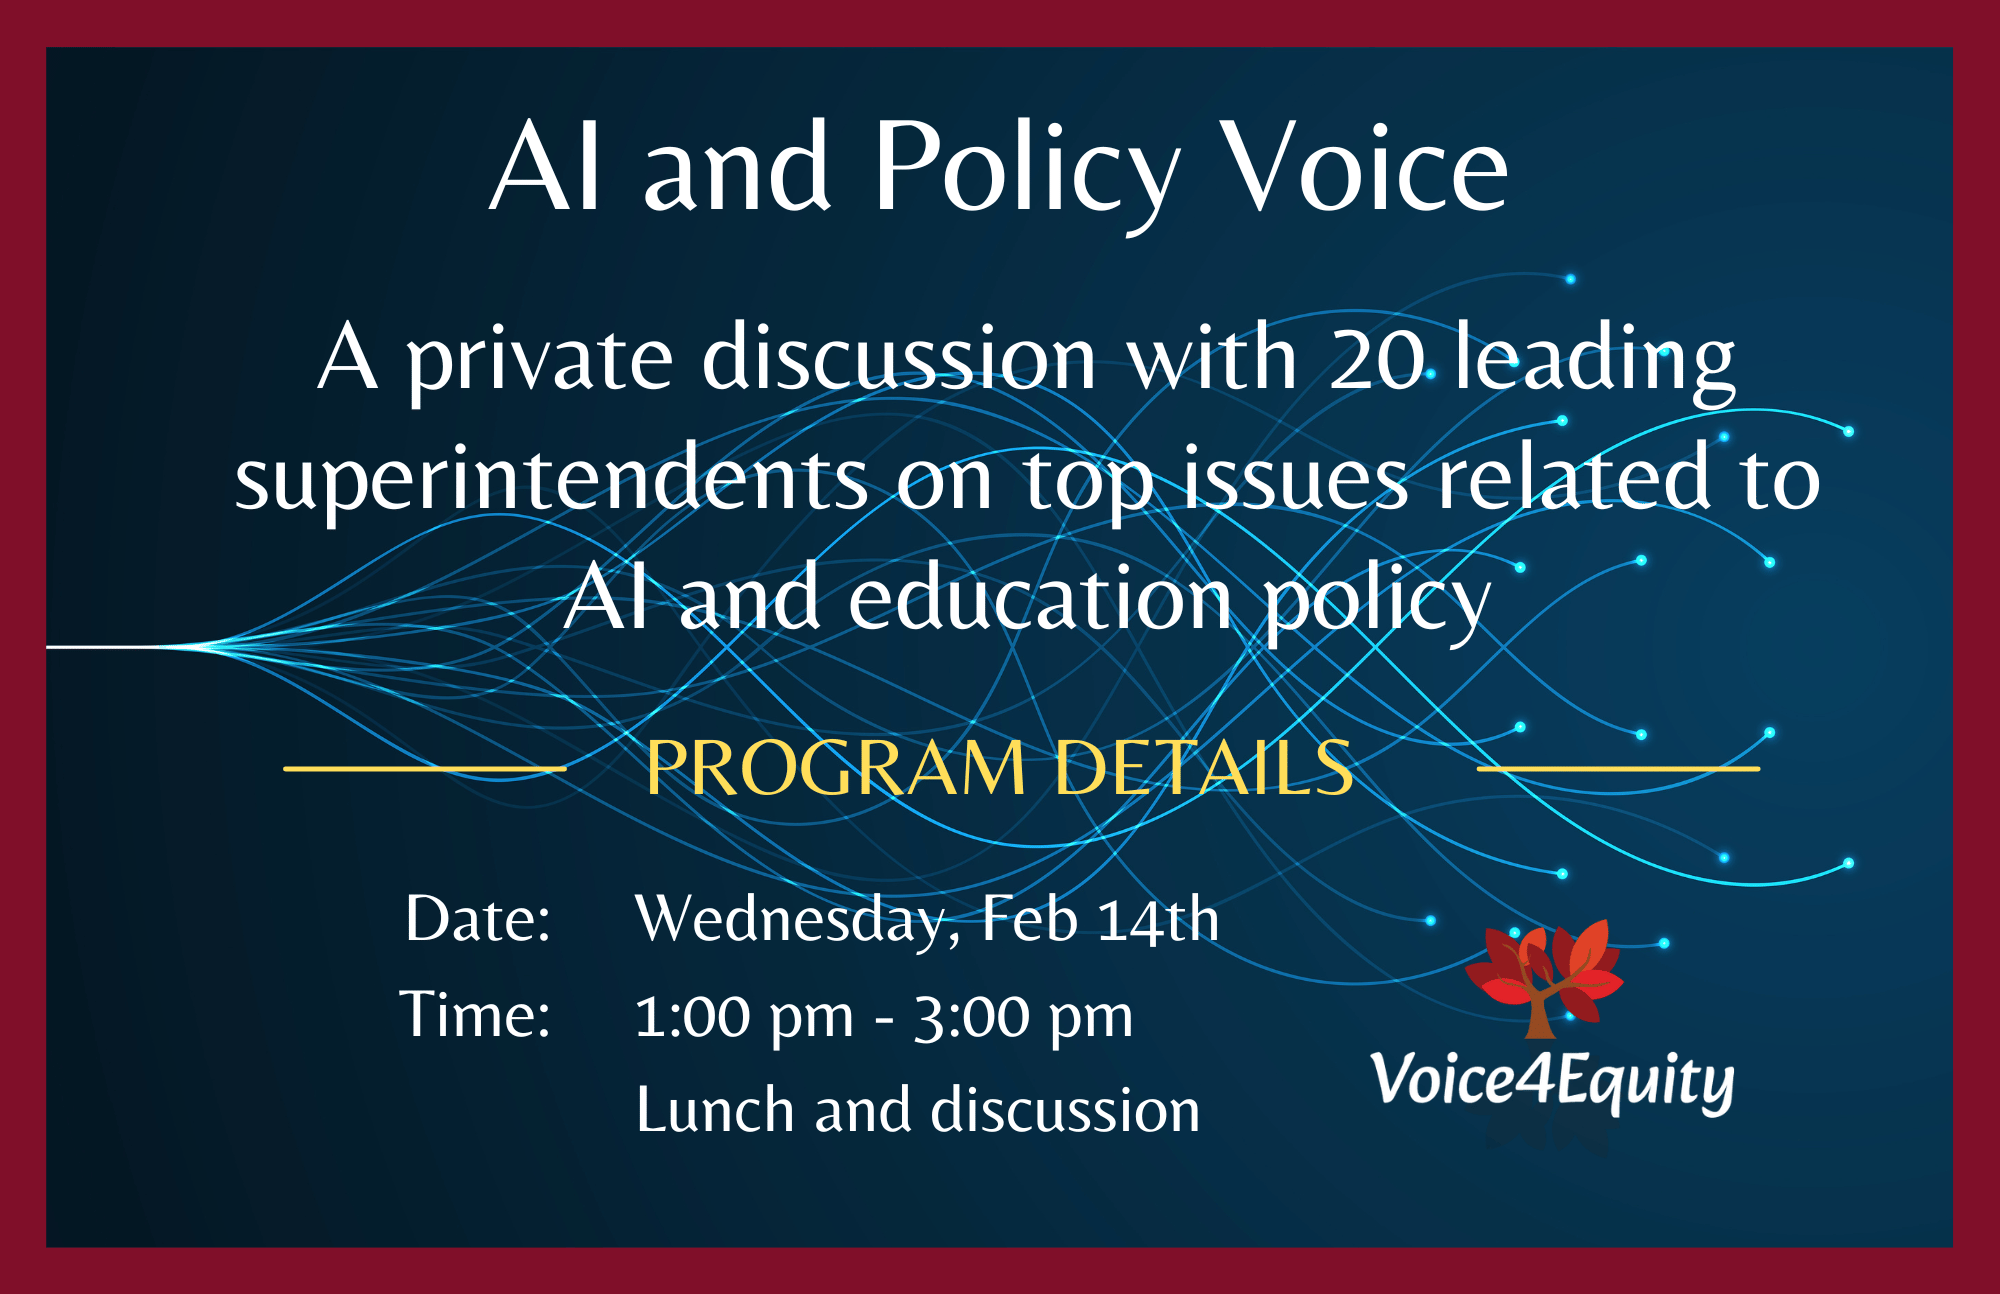 Invitation only private discussion on AI and Policy Voice at AASA NCE